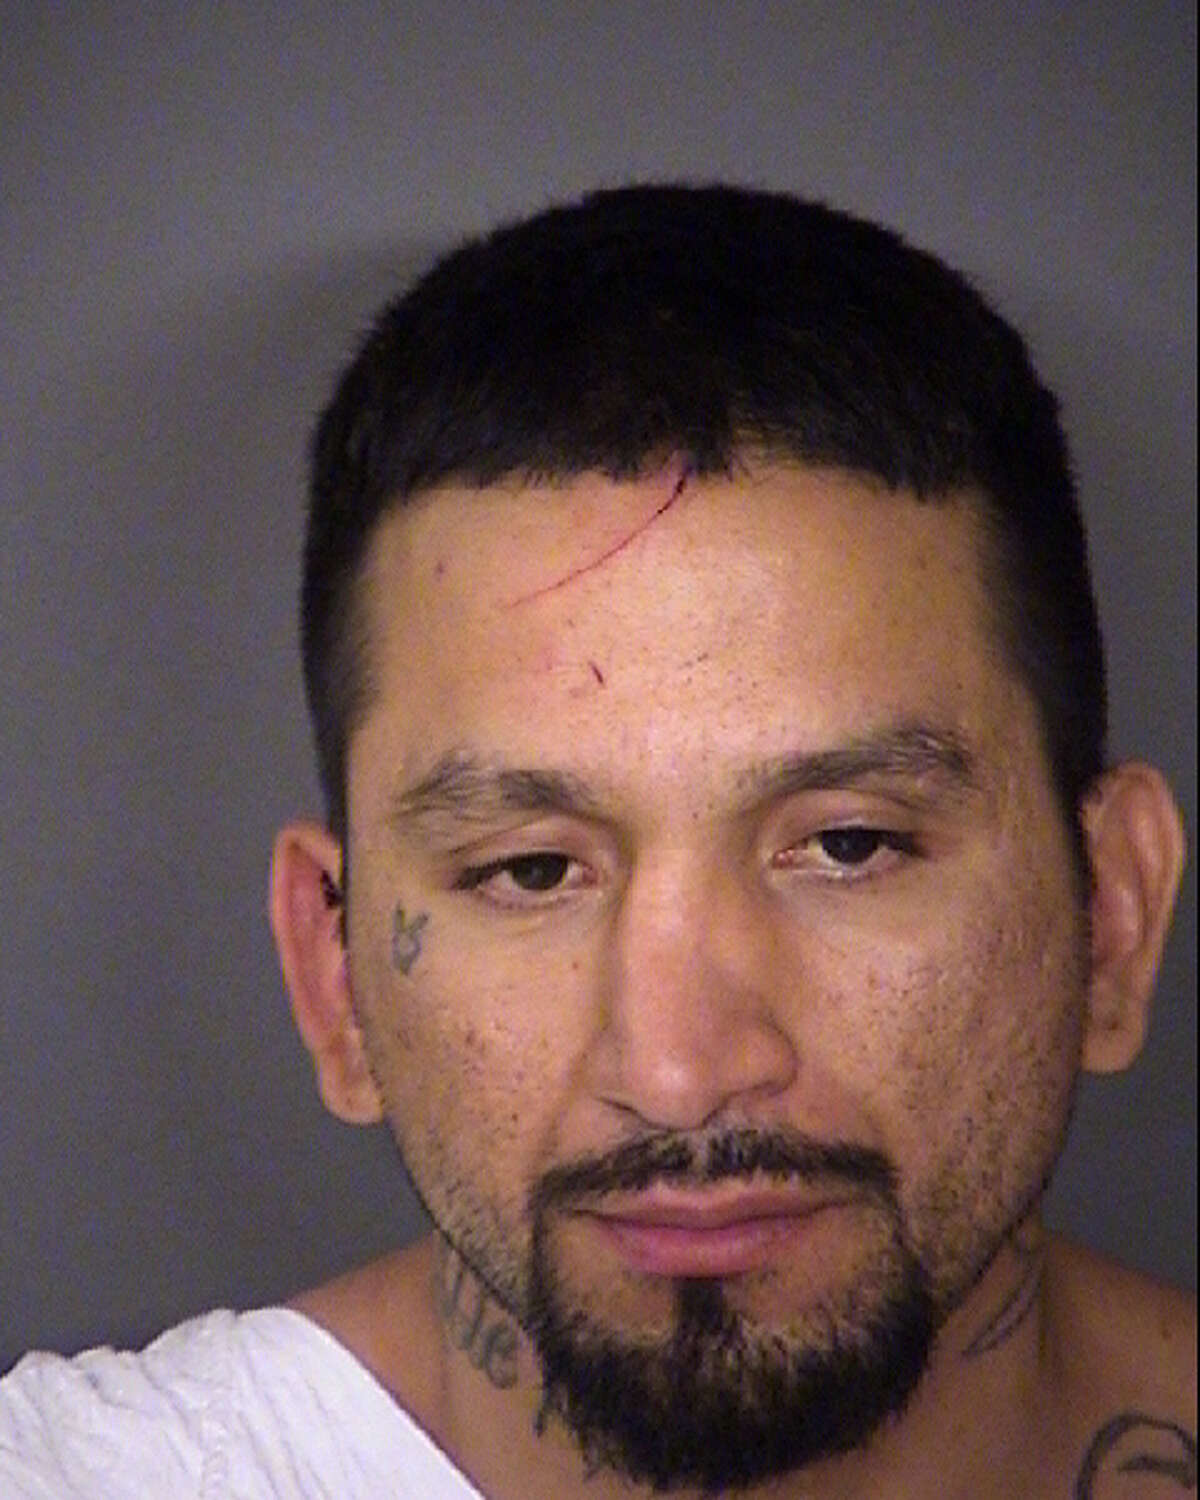 Daniel Reyes, 31, was arrested on a charge of first-degree murder.